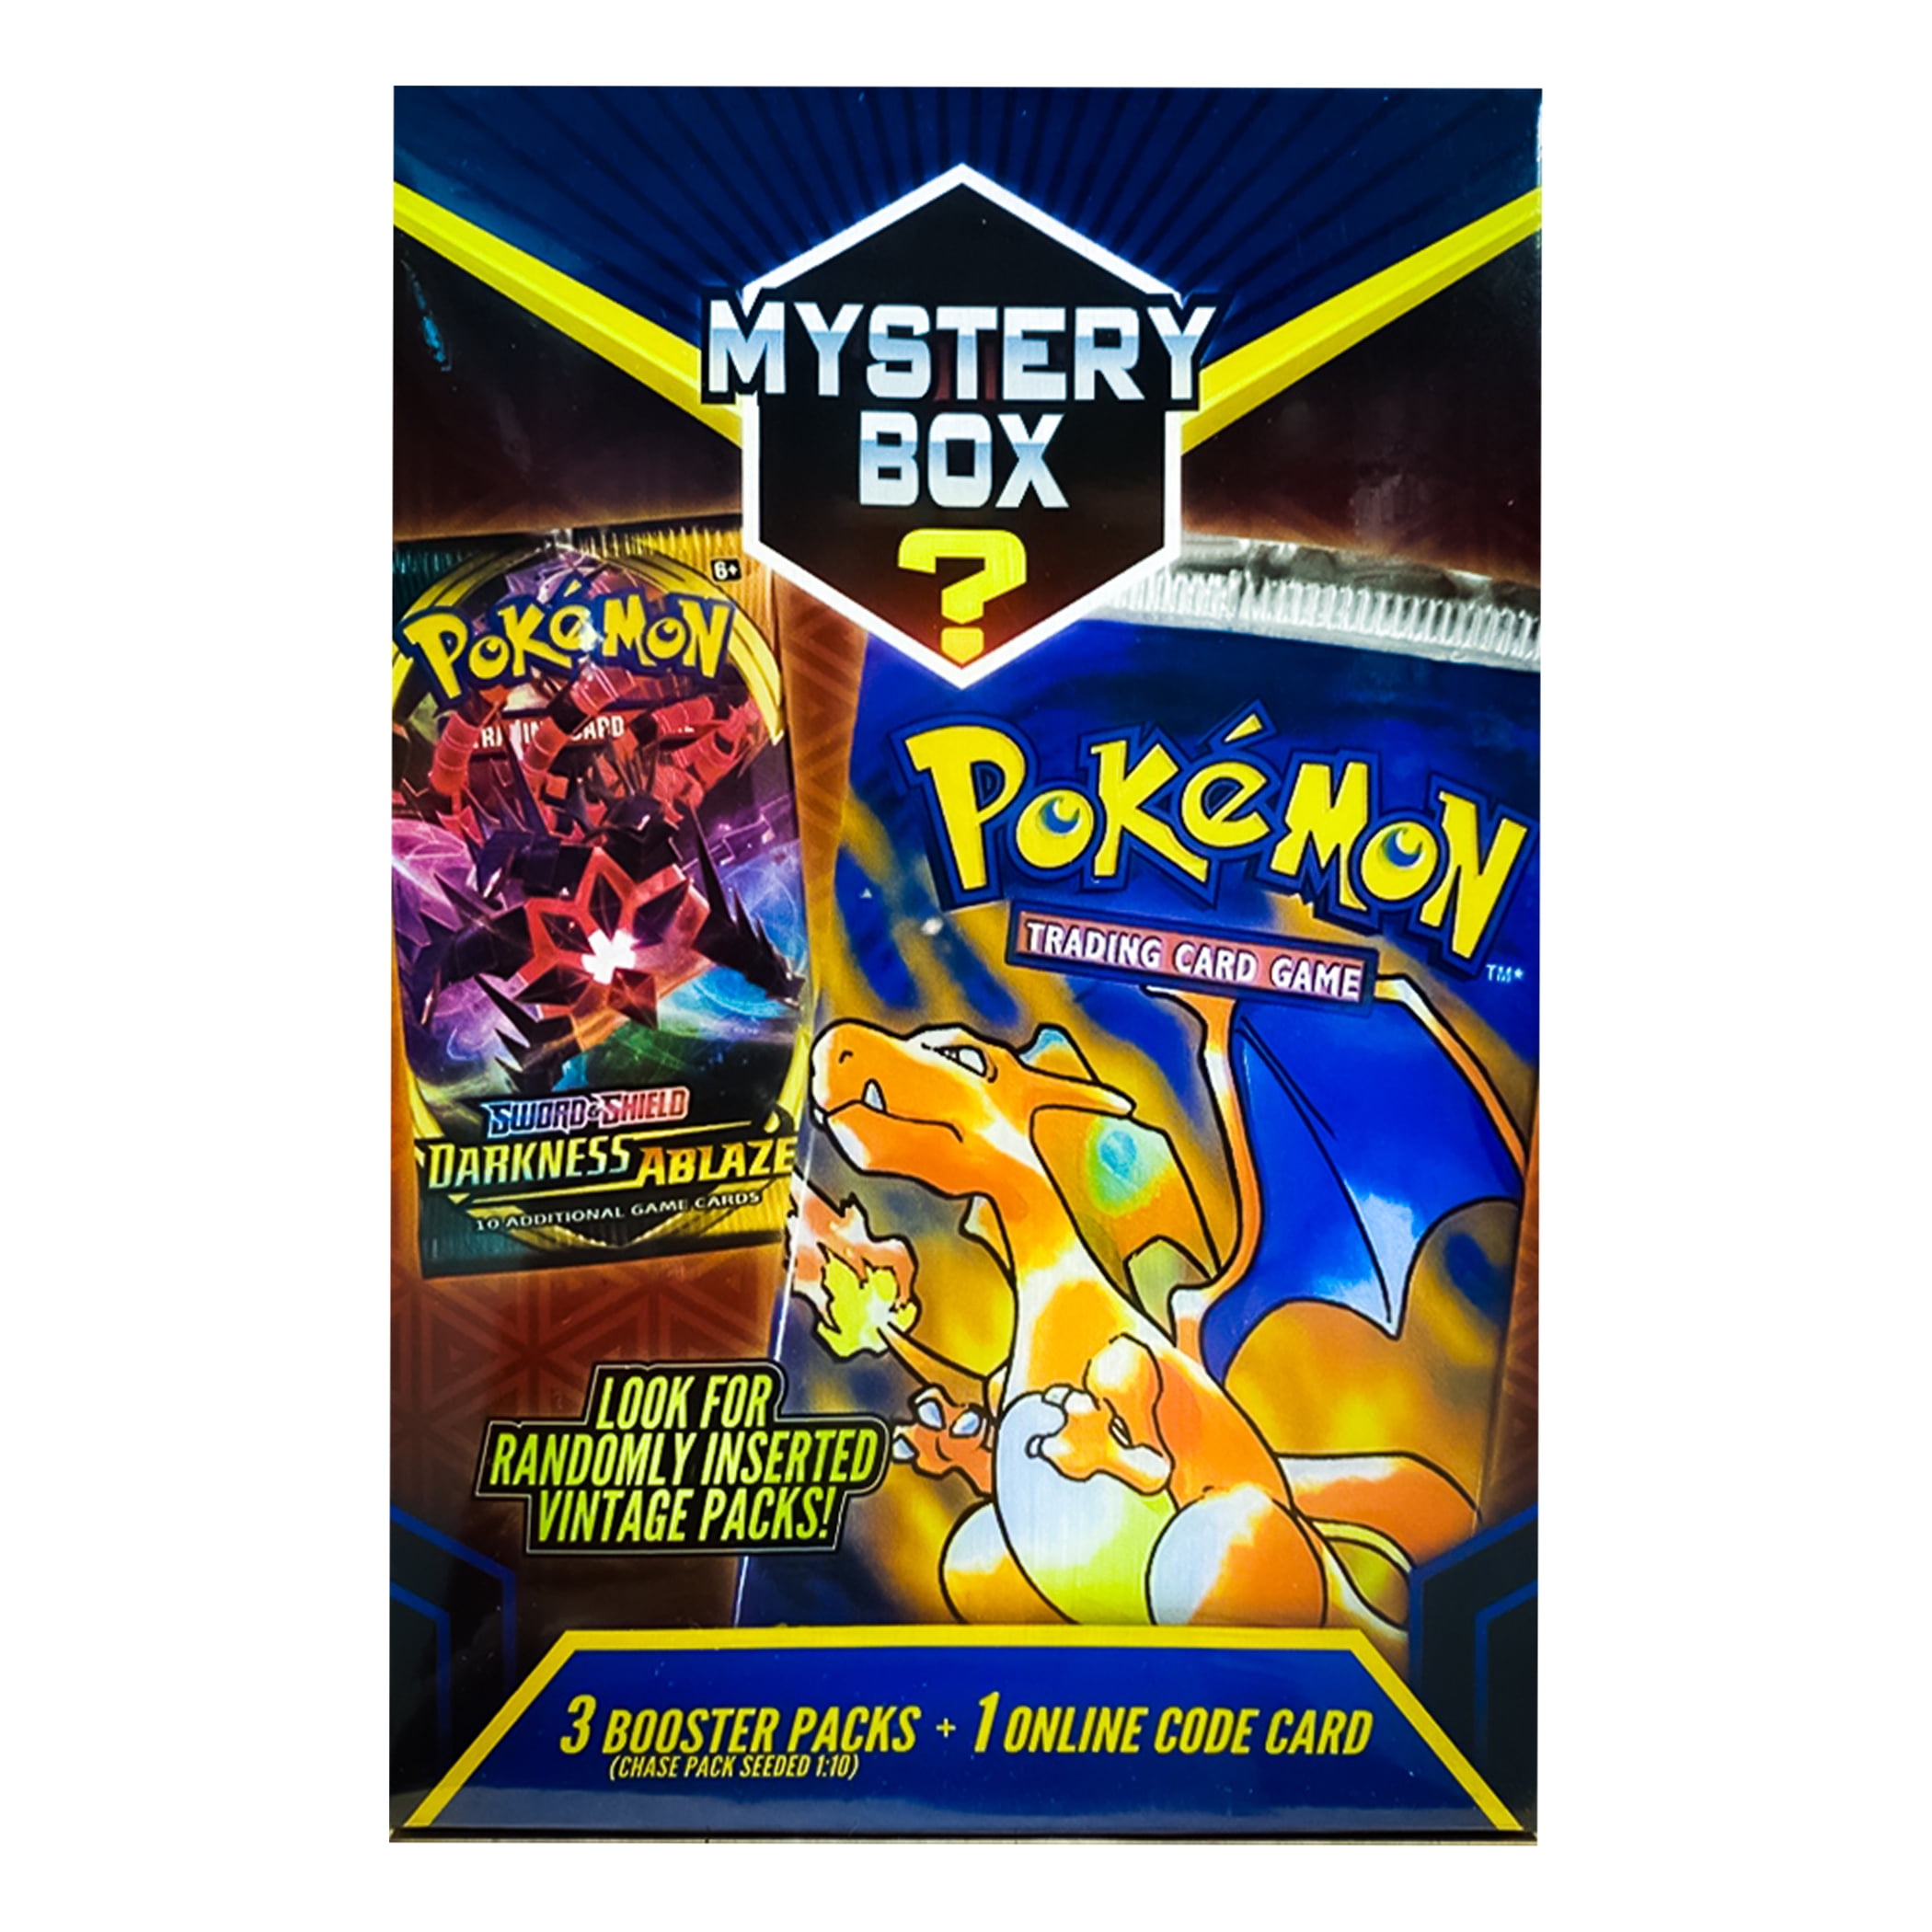 MORE READ DESCRIP Contains Pokemon Cards Pokemon MYSTERY Box Boosters Packs 